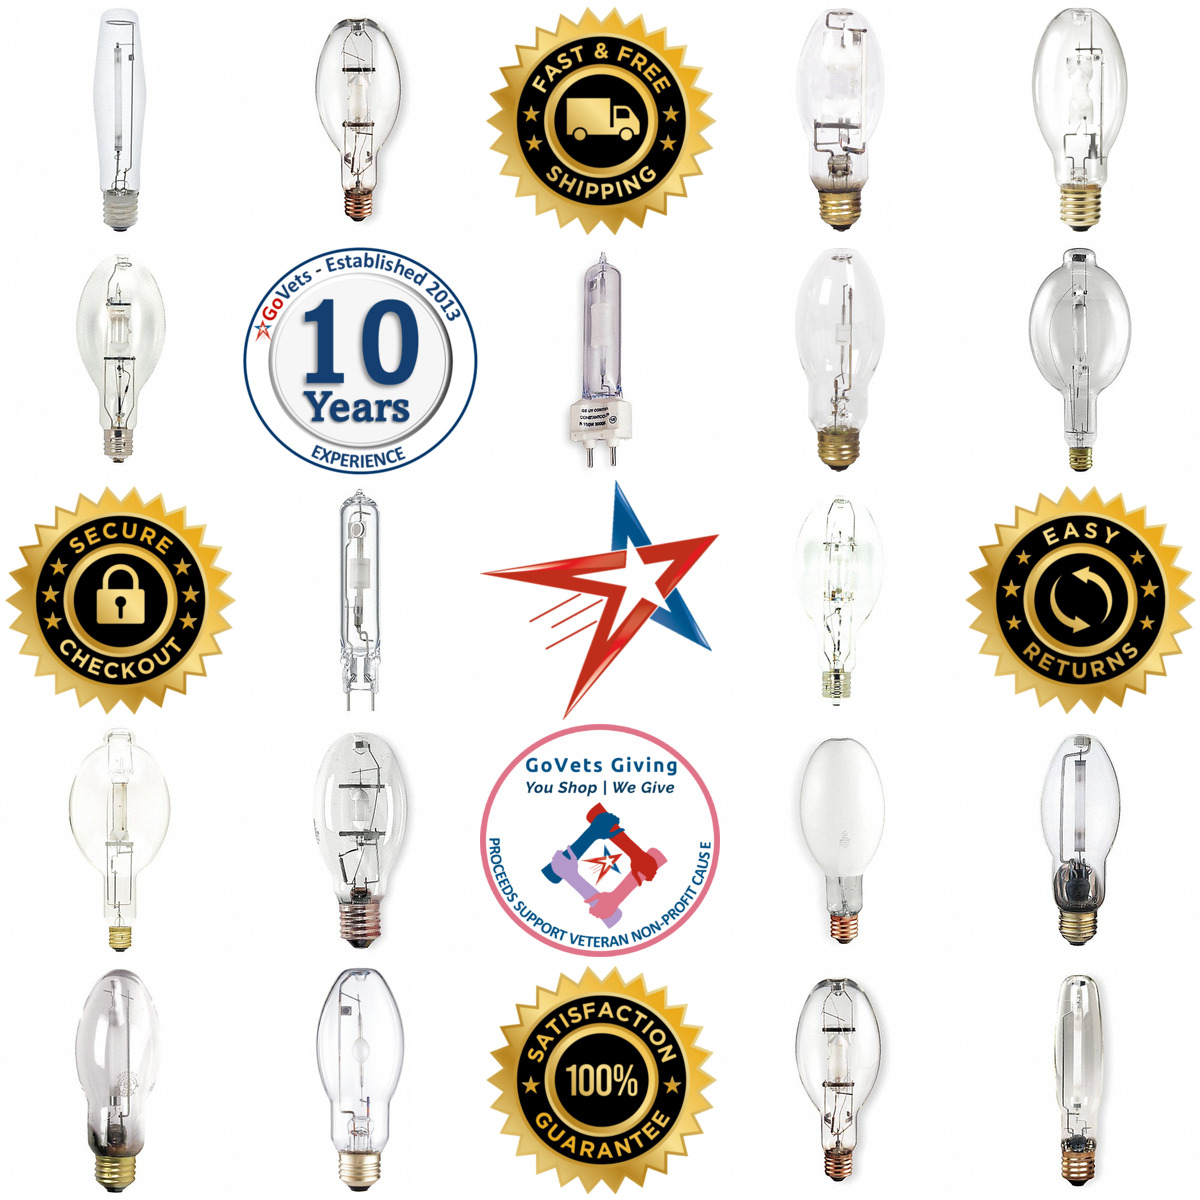 A selection of Hid Lamps and Bulbs products on GoVets